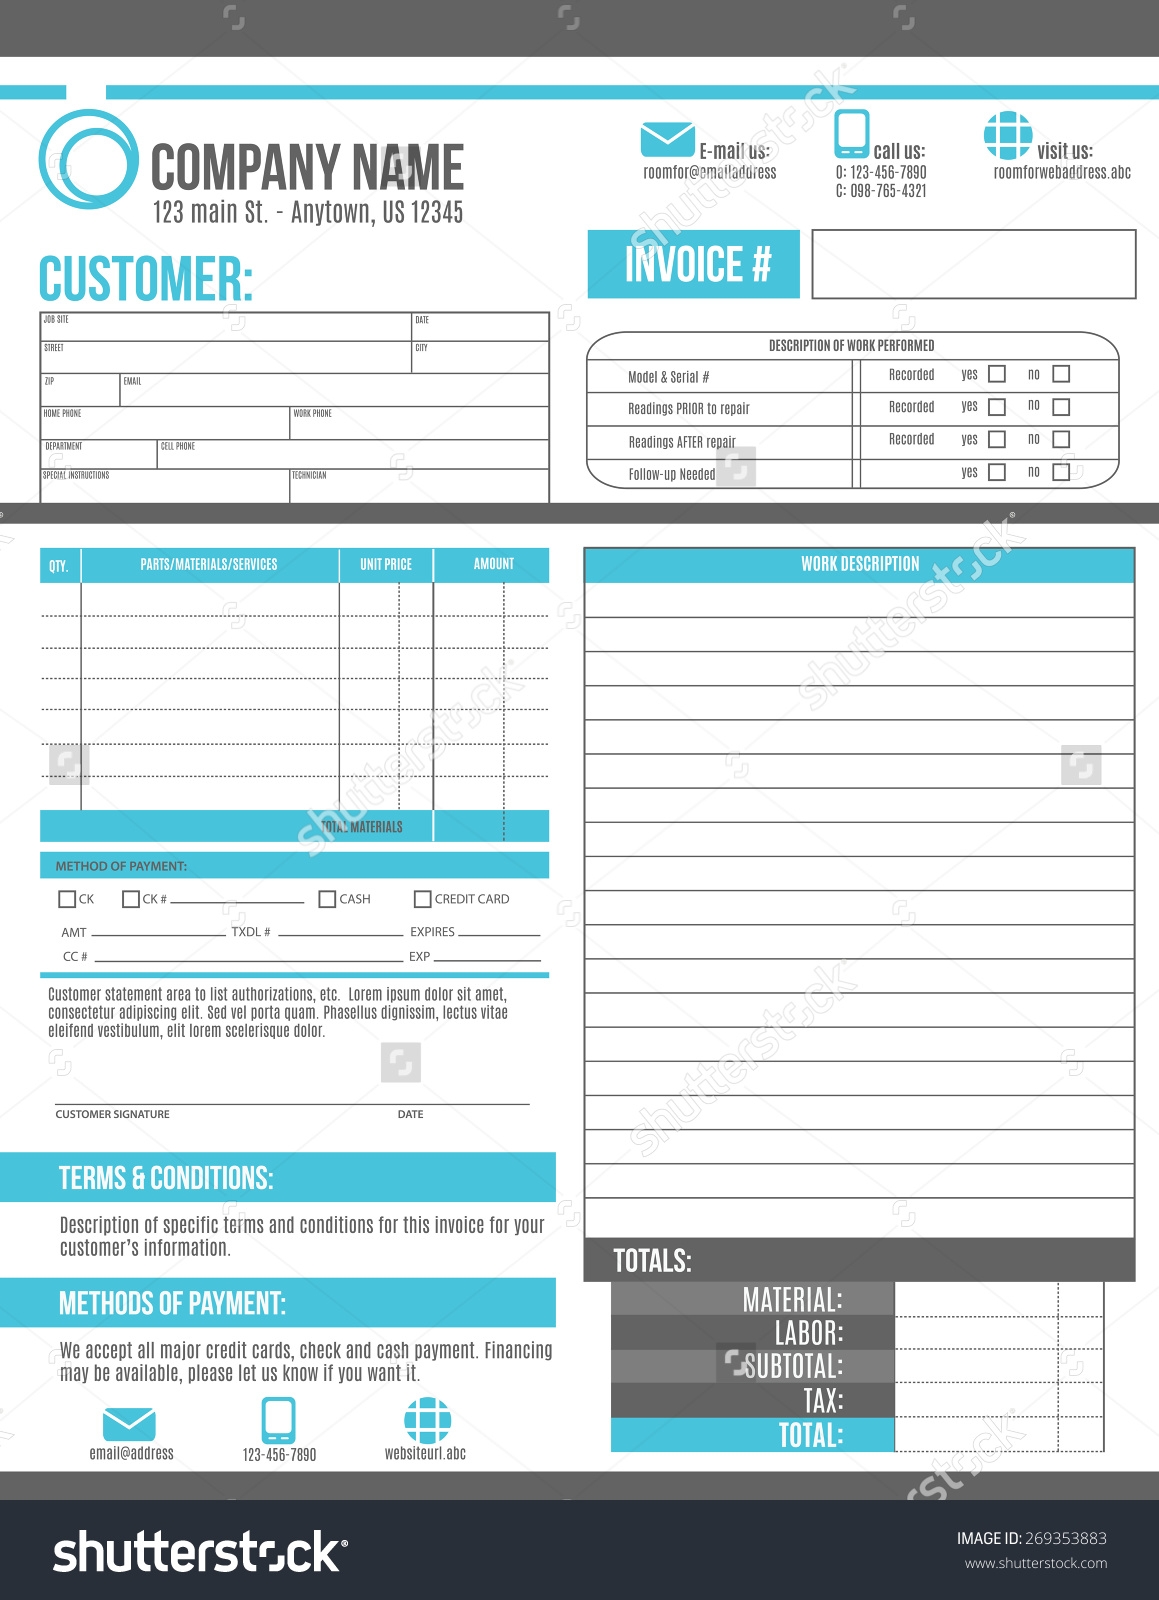 work order invoice customizable invoice template design with room for a work order 1159 X 1600